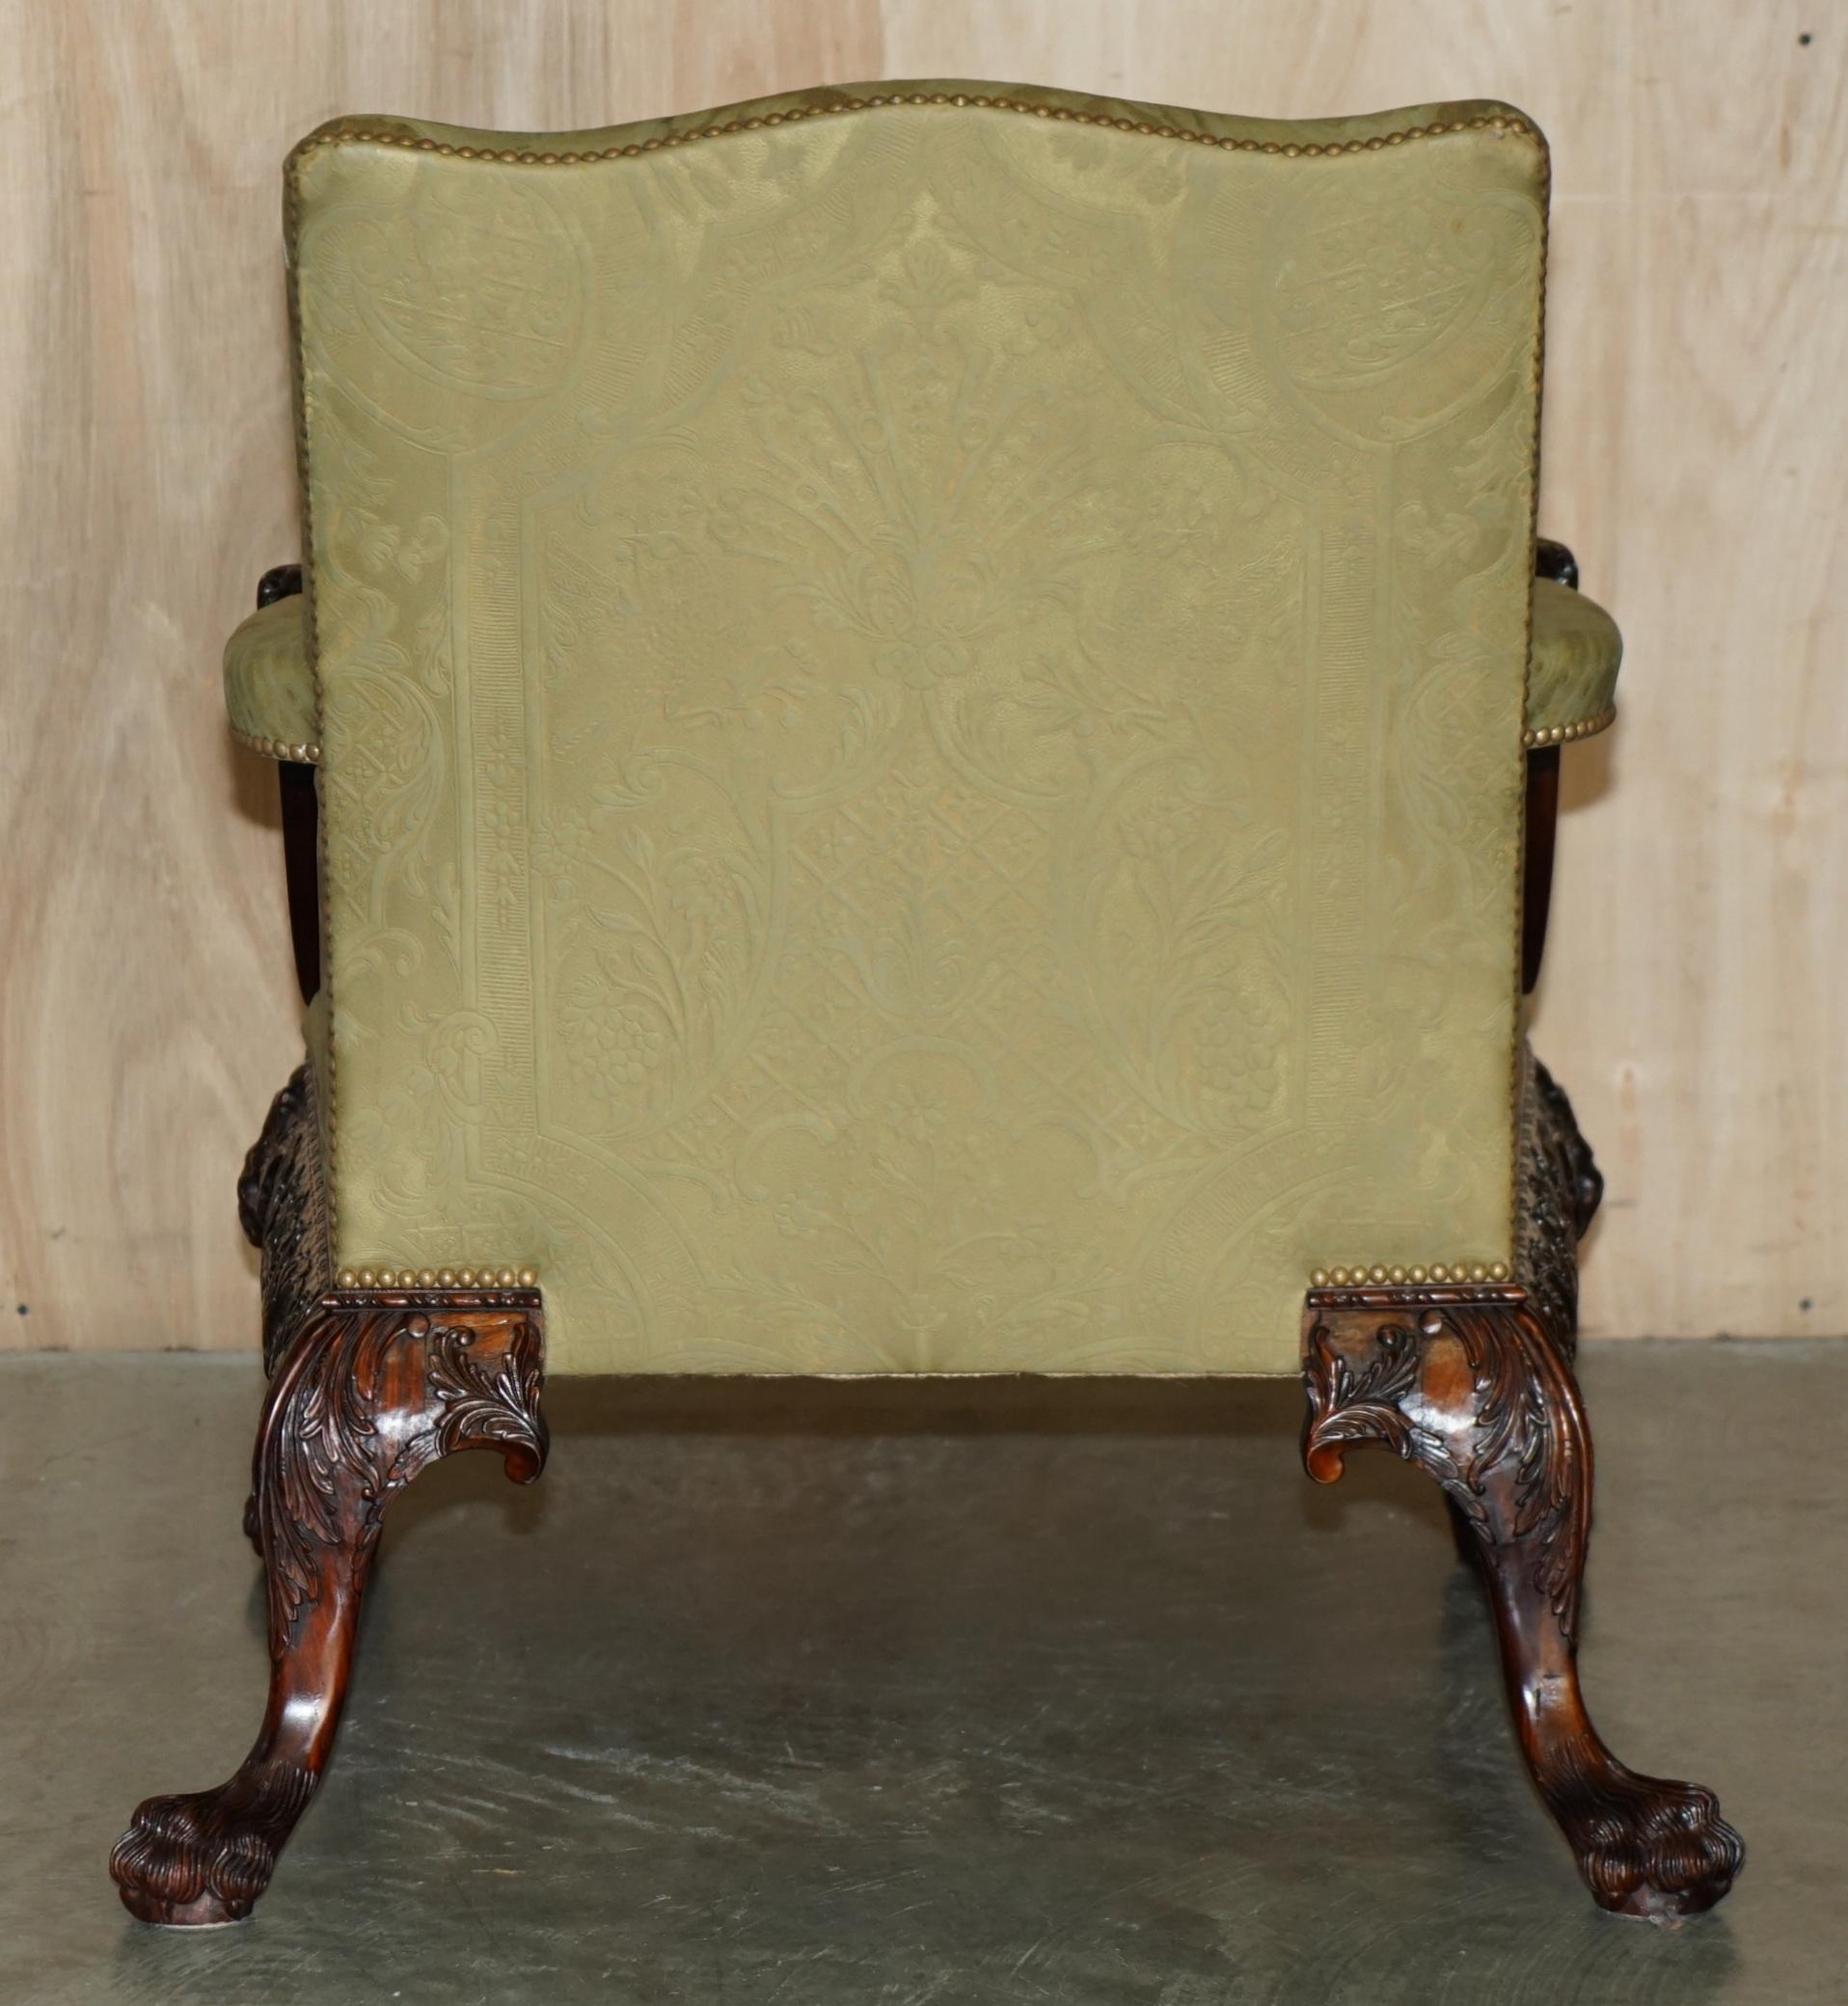 FINE PAiR OF LARGE CARved GAINSBOROUGH ARMCHAIRS AFTER GILES GRENDEY 1693-1780 im Angebot 8